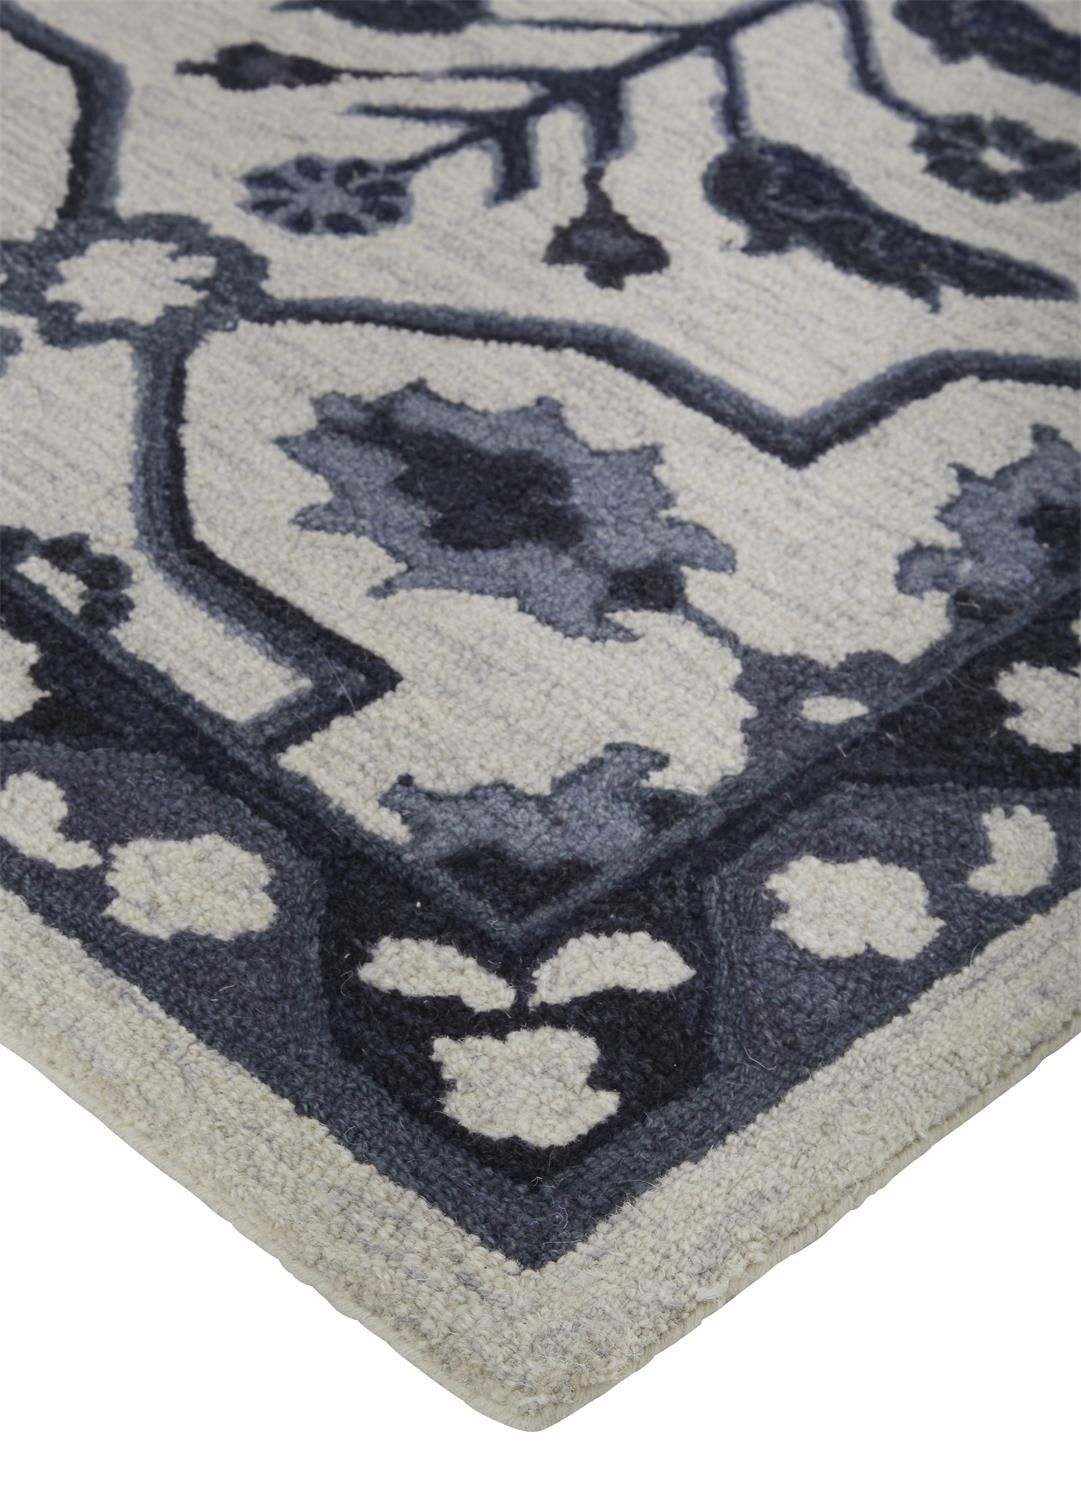 8' X 10' Blue And Gray Wool Floral Tufted Handmade Stain Resistant Area Rug